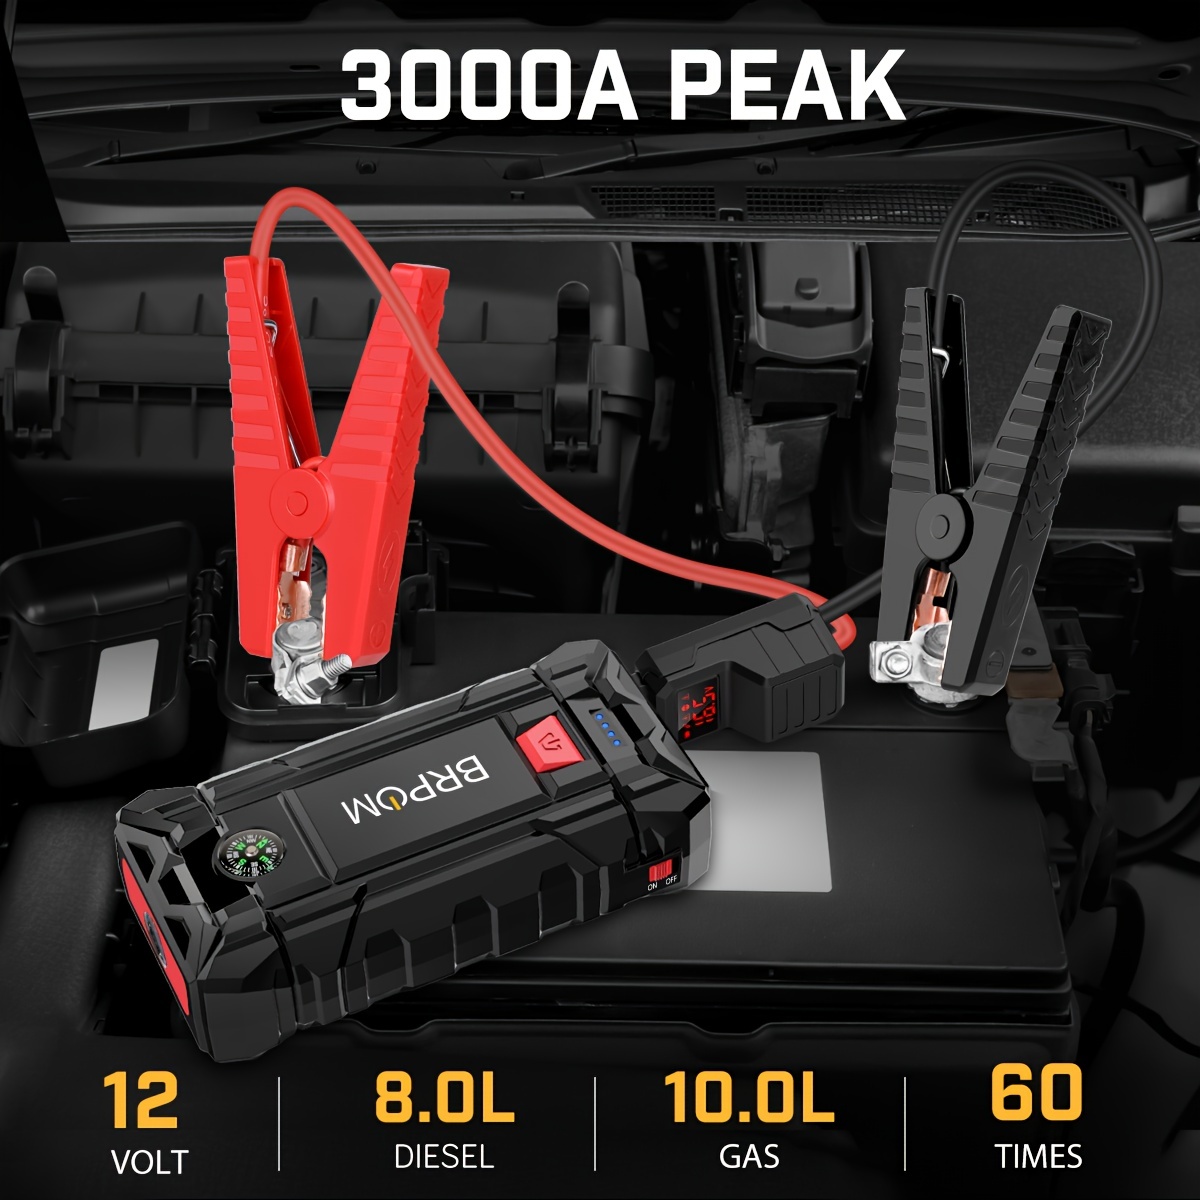 Biuble Car Jump Starter, 3000A Peak 26800mAh 12V Battery Booster Pack with  DC Charger Portable Bag(up to 10L Petrol or 8.0L Diesel Engine) 